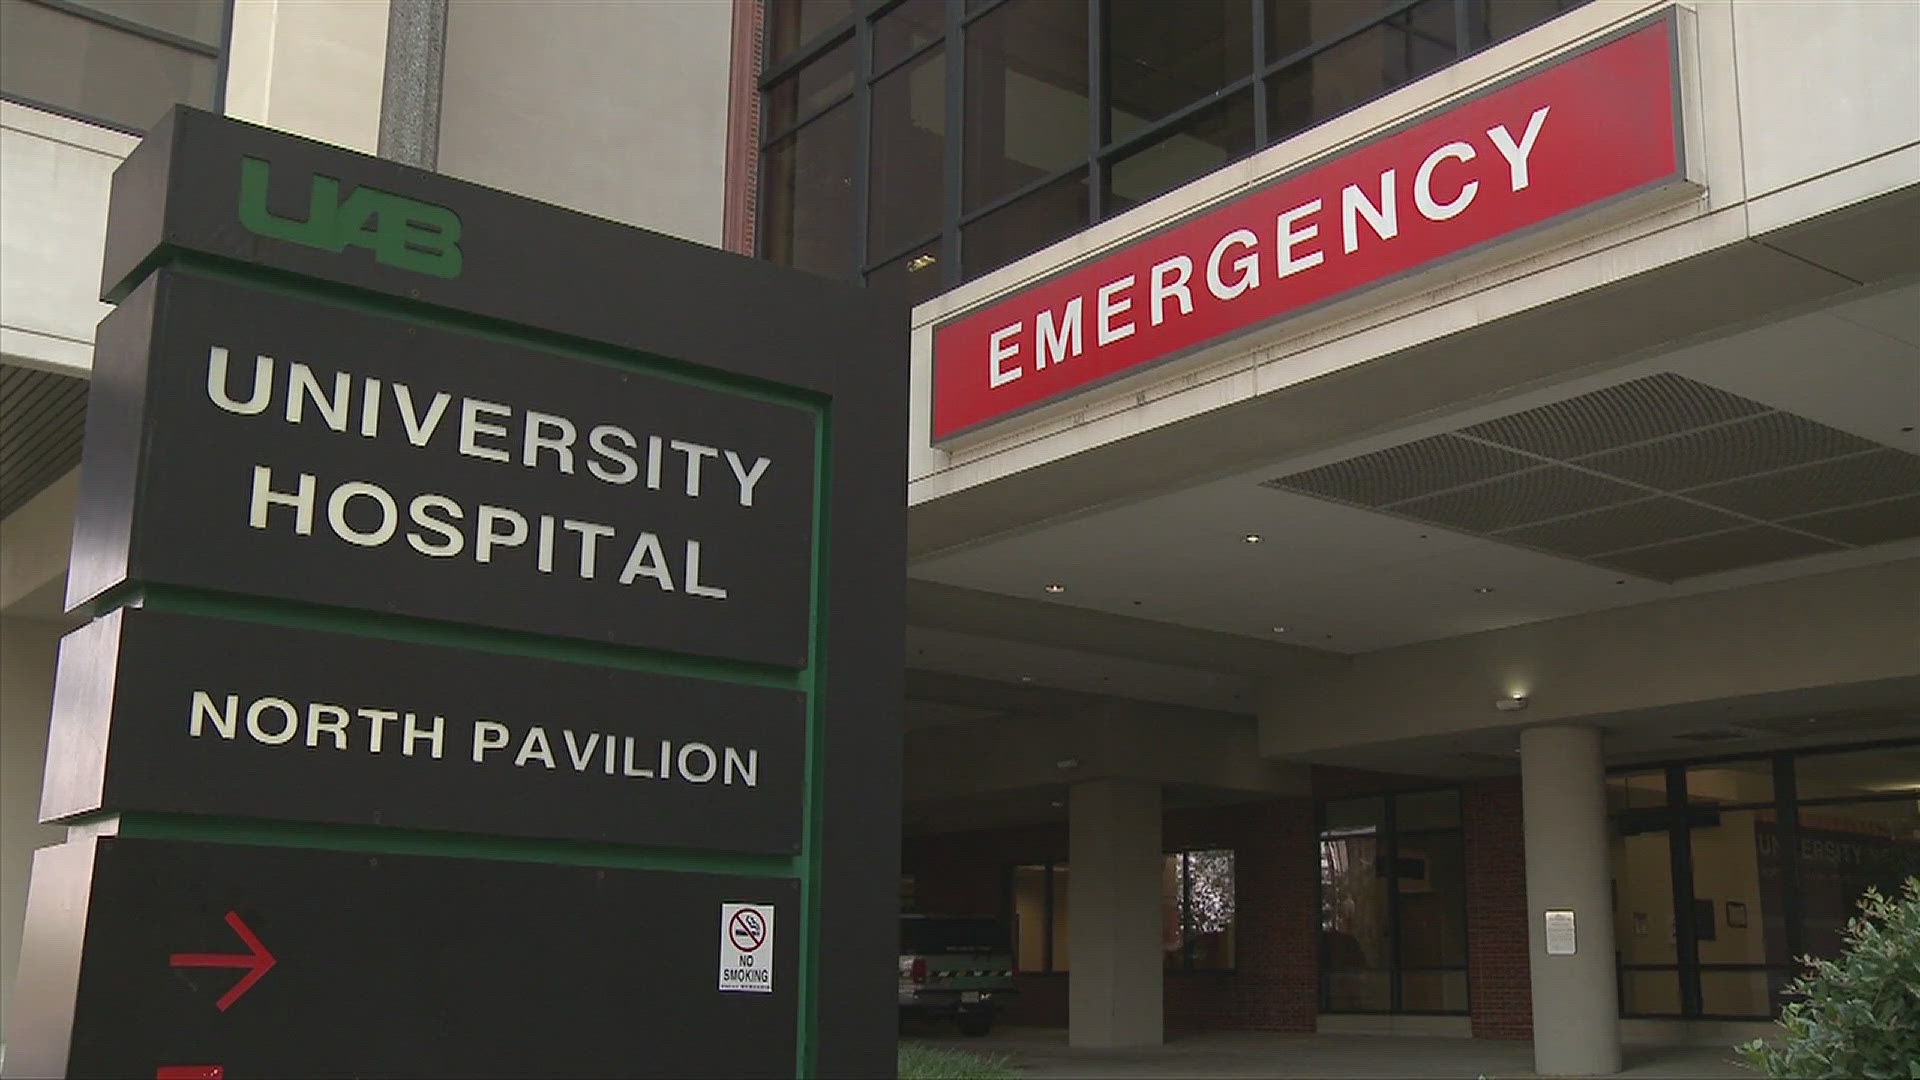 Announcement follows several lawsuits alleging UAB took organs from inmates without consent